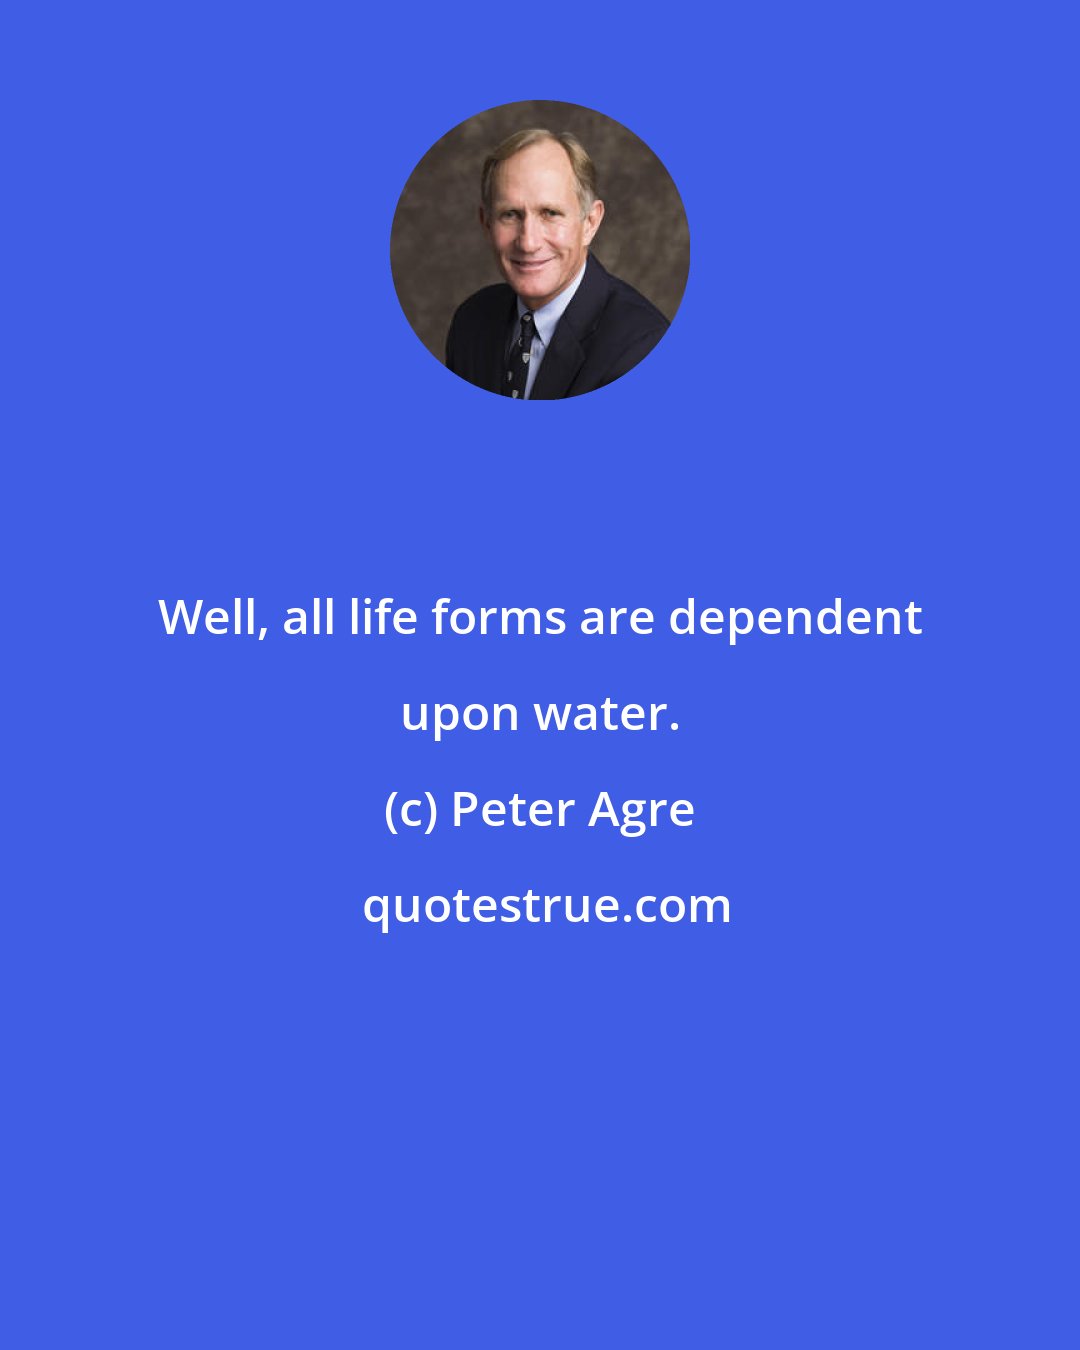 Peter Agre: Well, all life forms are dependent upon water.